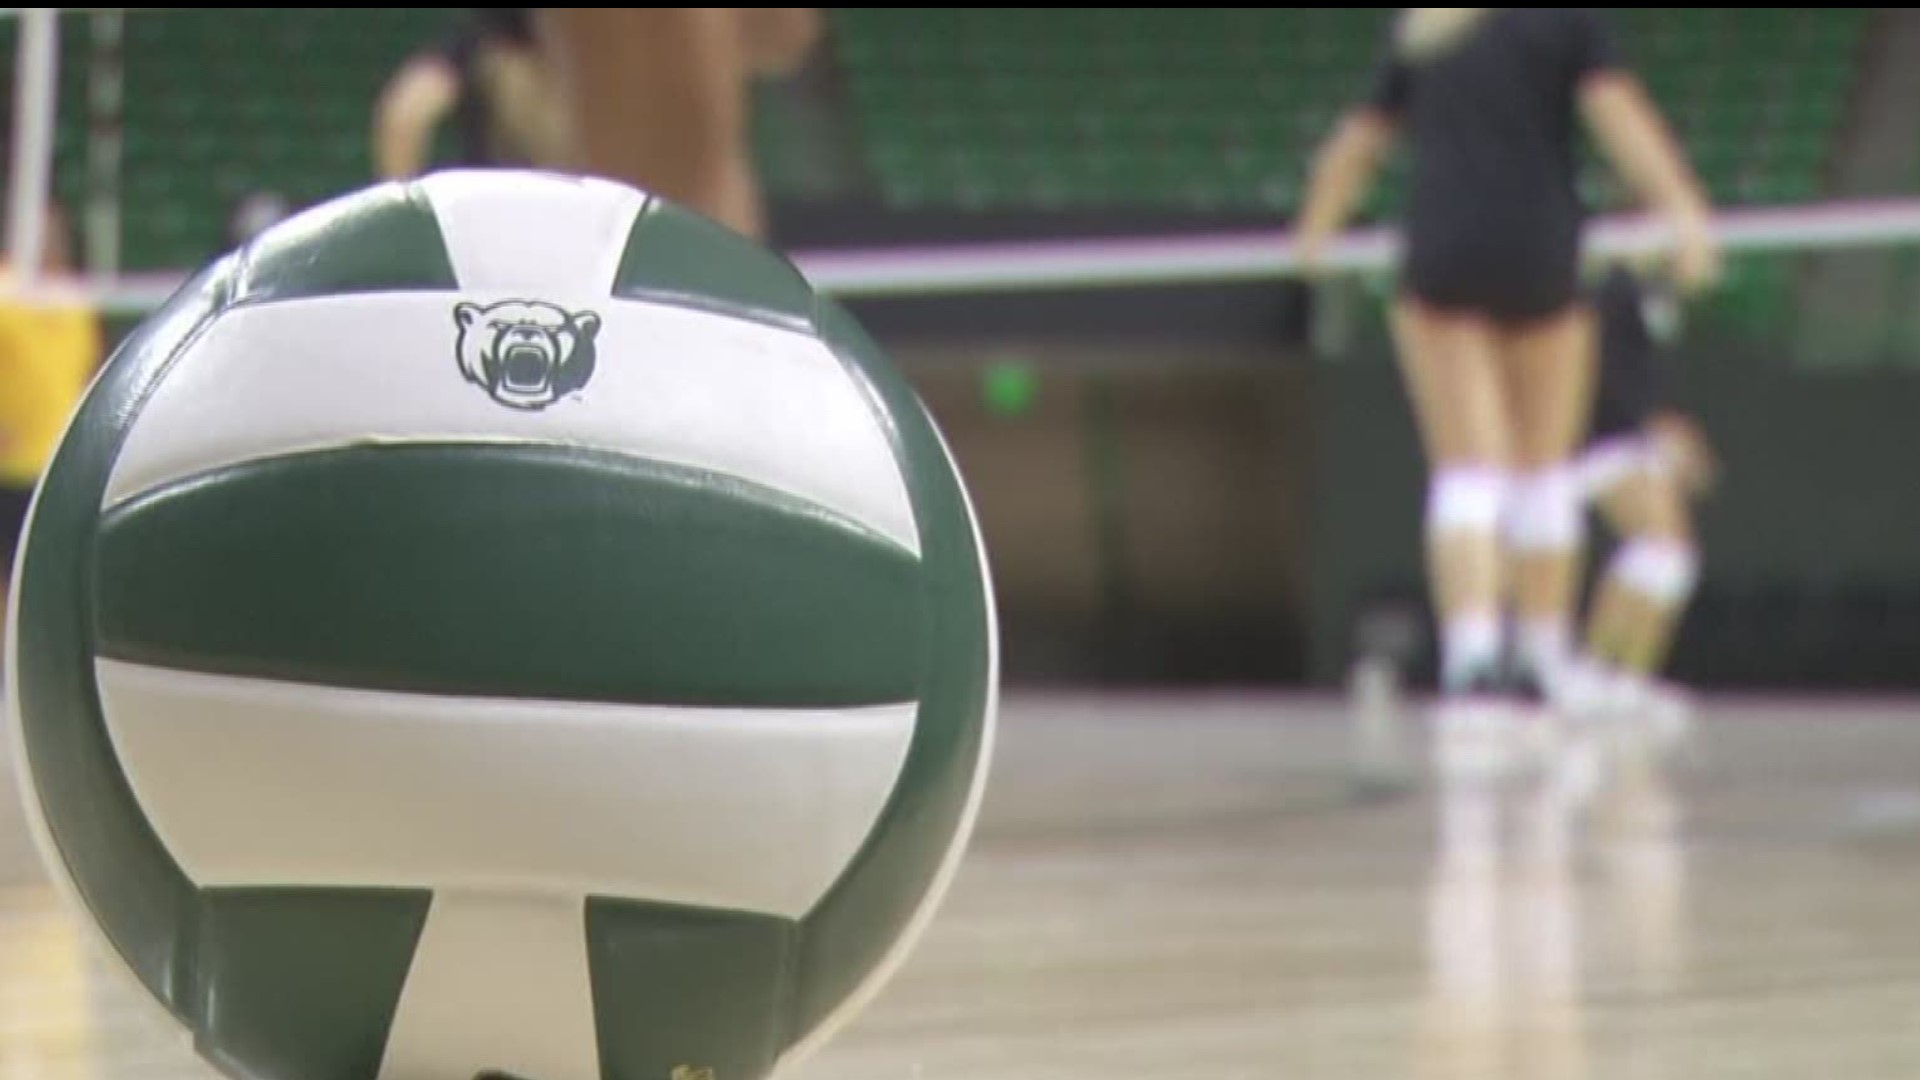 Baylor’s volleyball team remains #1.